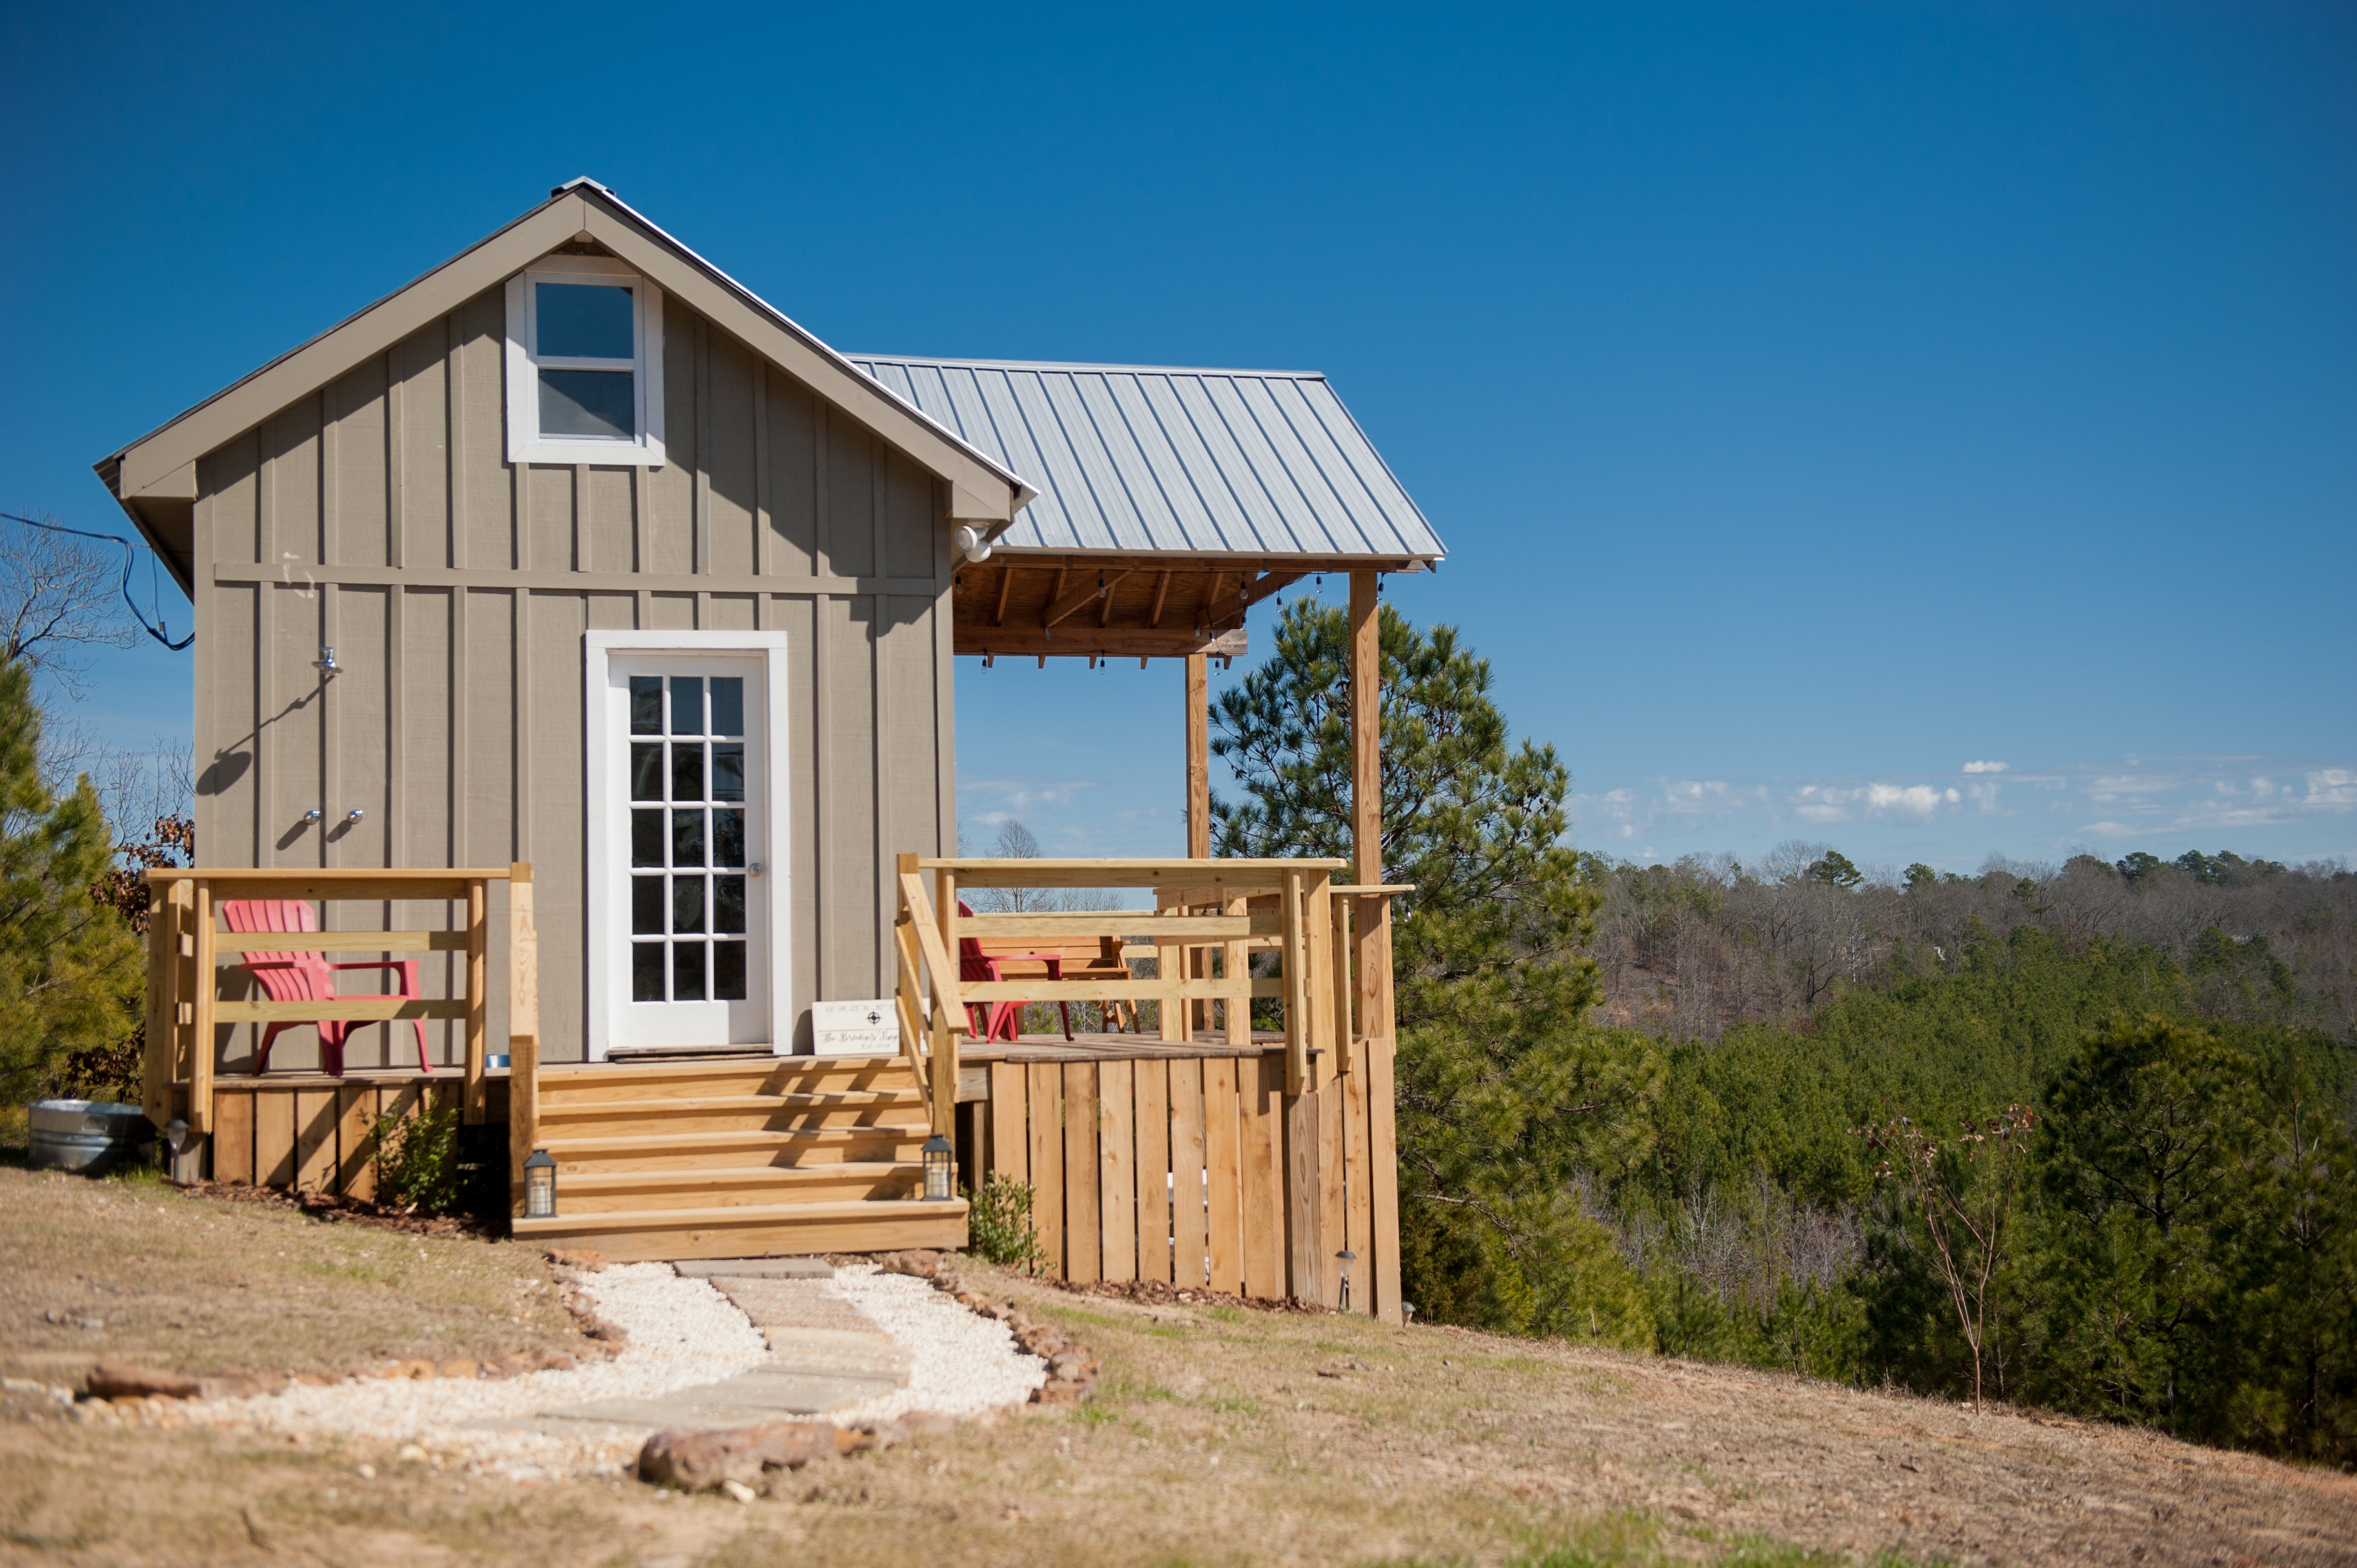 New College Professor Fulfills Dream of Building Tiny House